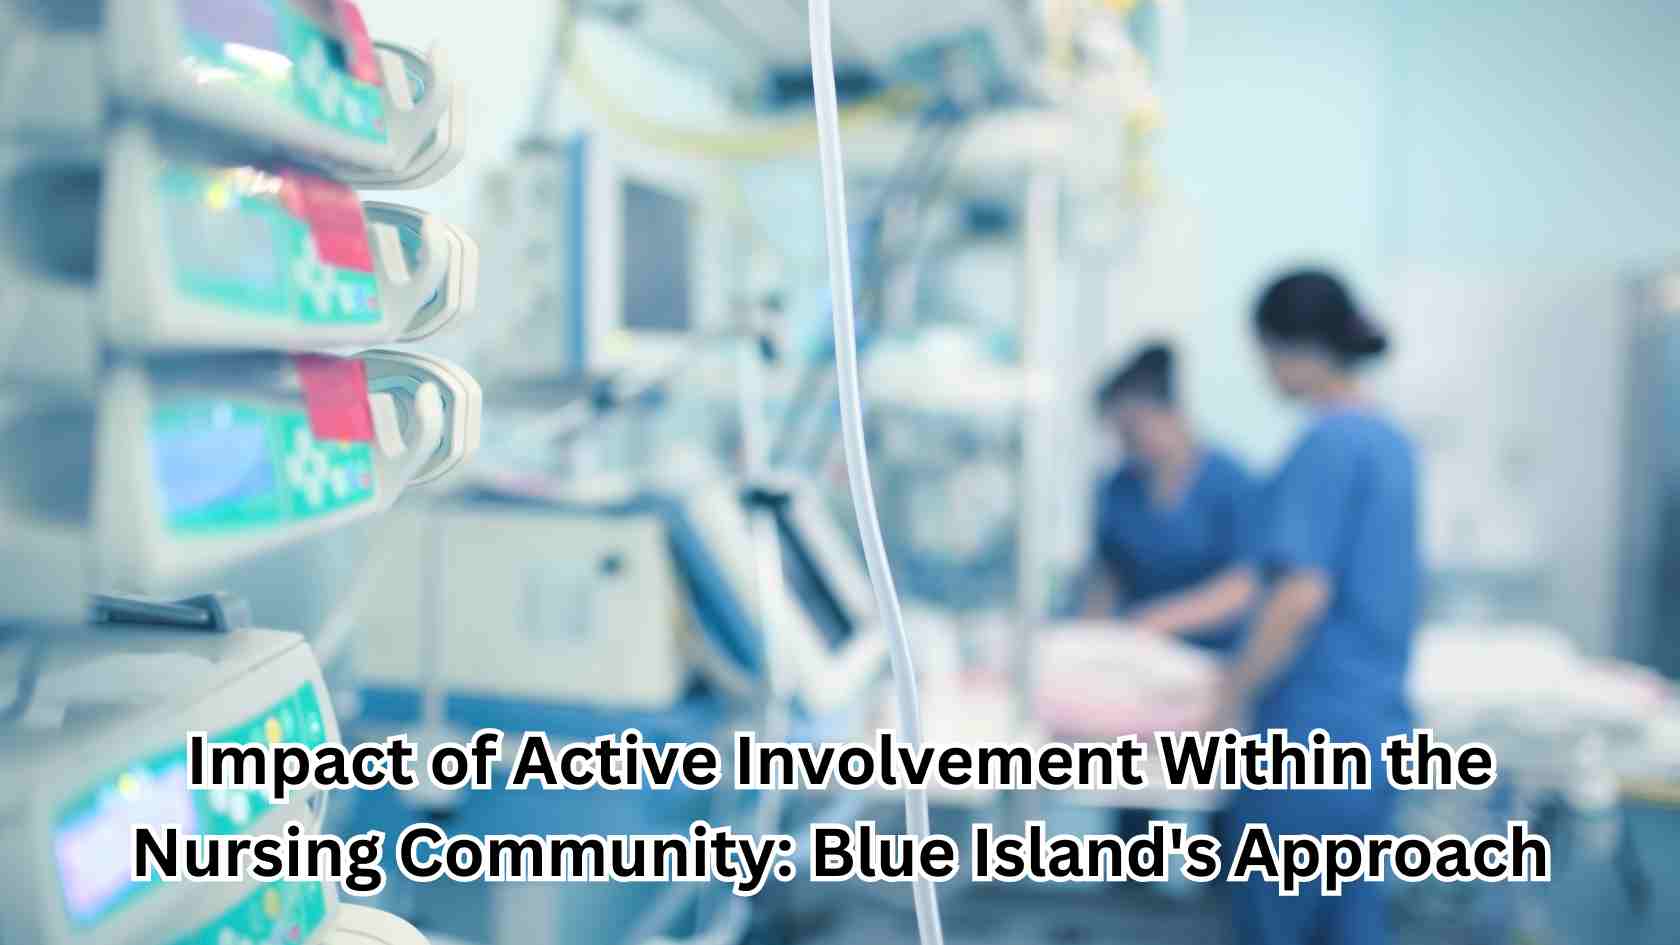 Impact of Active Involvement Within the Nursing Community: Blue Island’s Approach